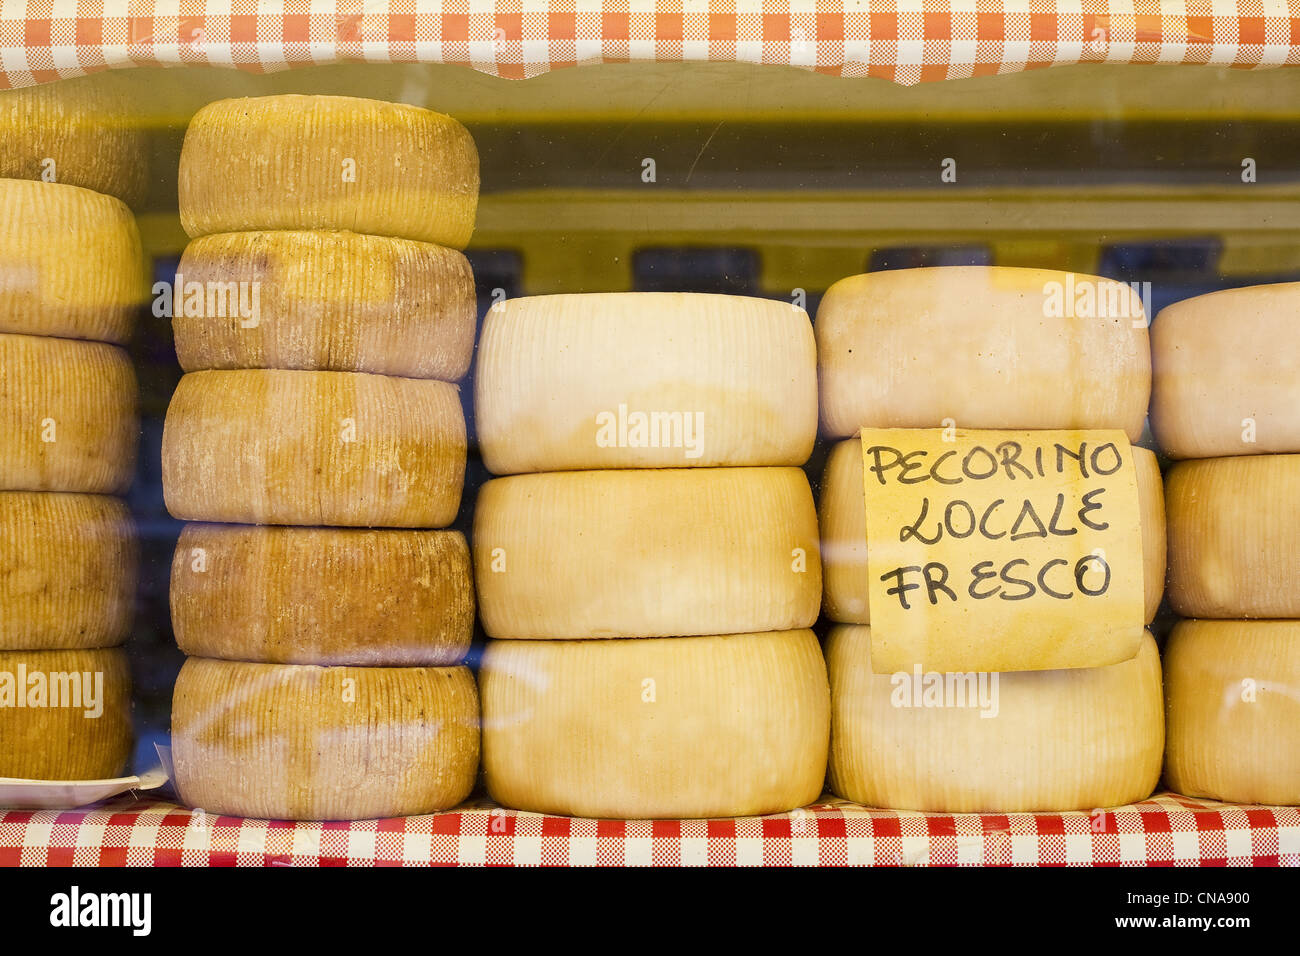 Italy, Puglia, Lecce, front of cheese shop with pecorino goat cheese Stock Photo